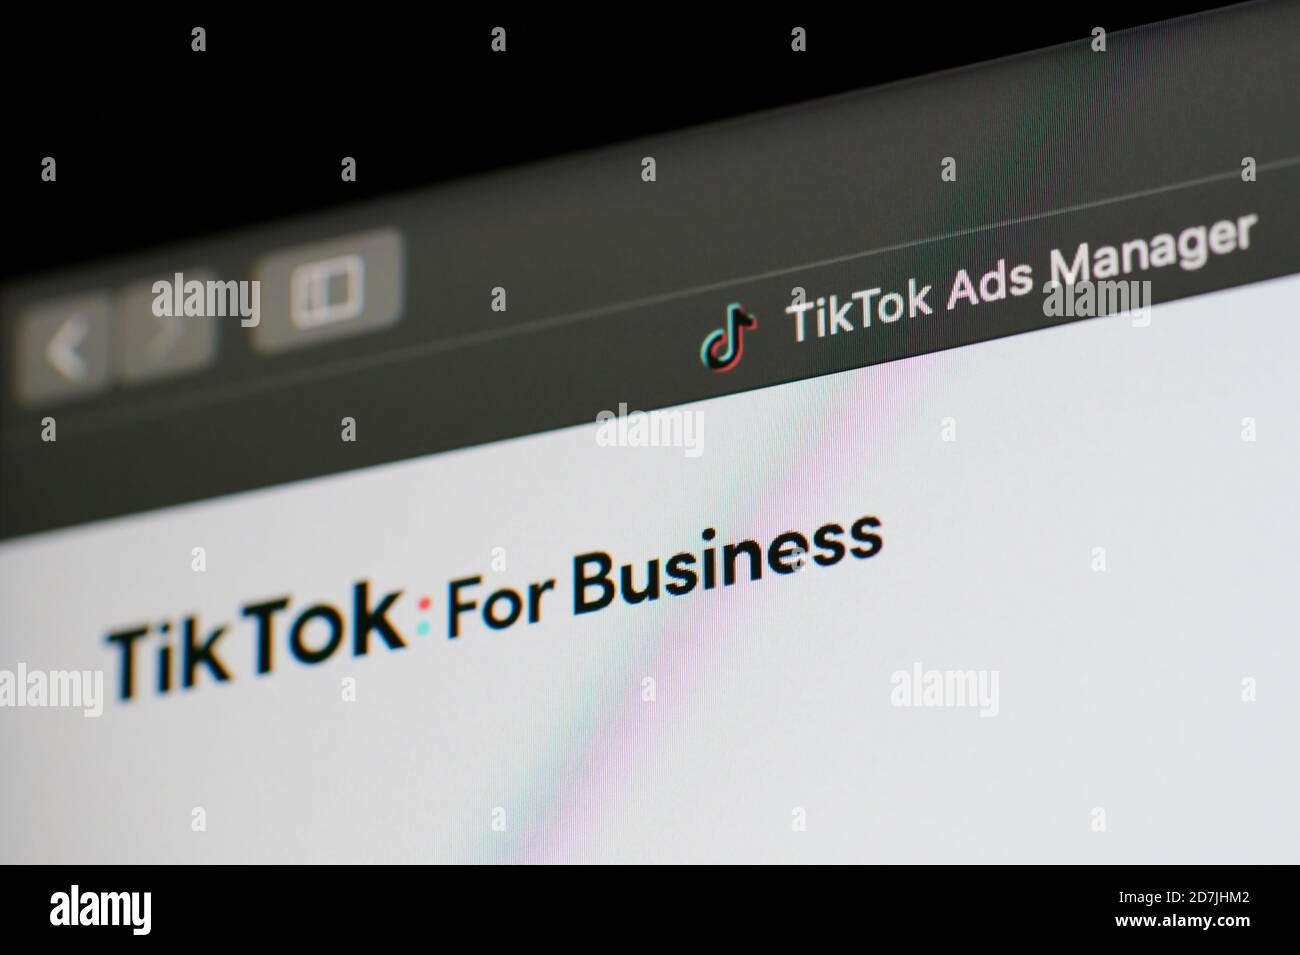 New york, USA - October 23, 2020:Checking Tiktok for business page screen display close up view Stock Photo